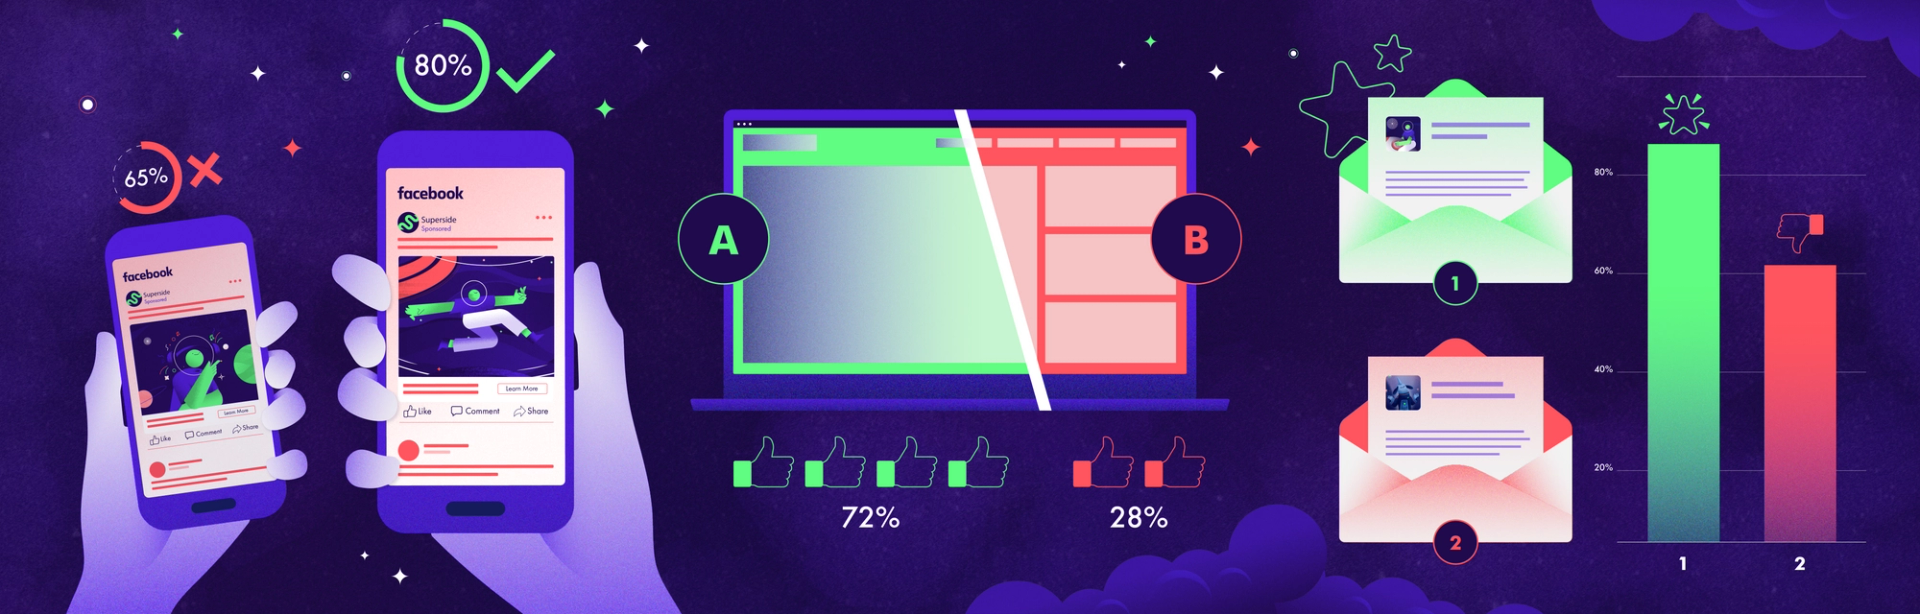 Importance Of A/B Testing Designs In Performance Marketing